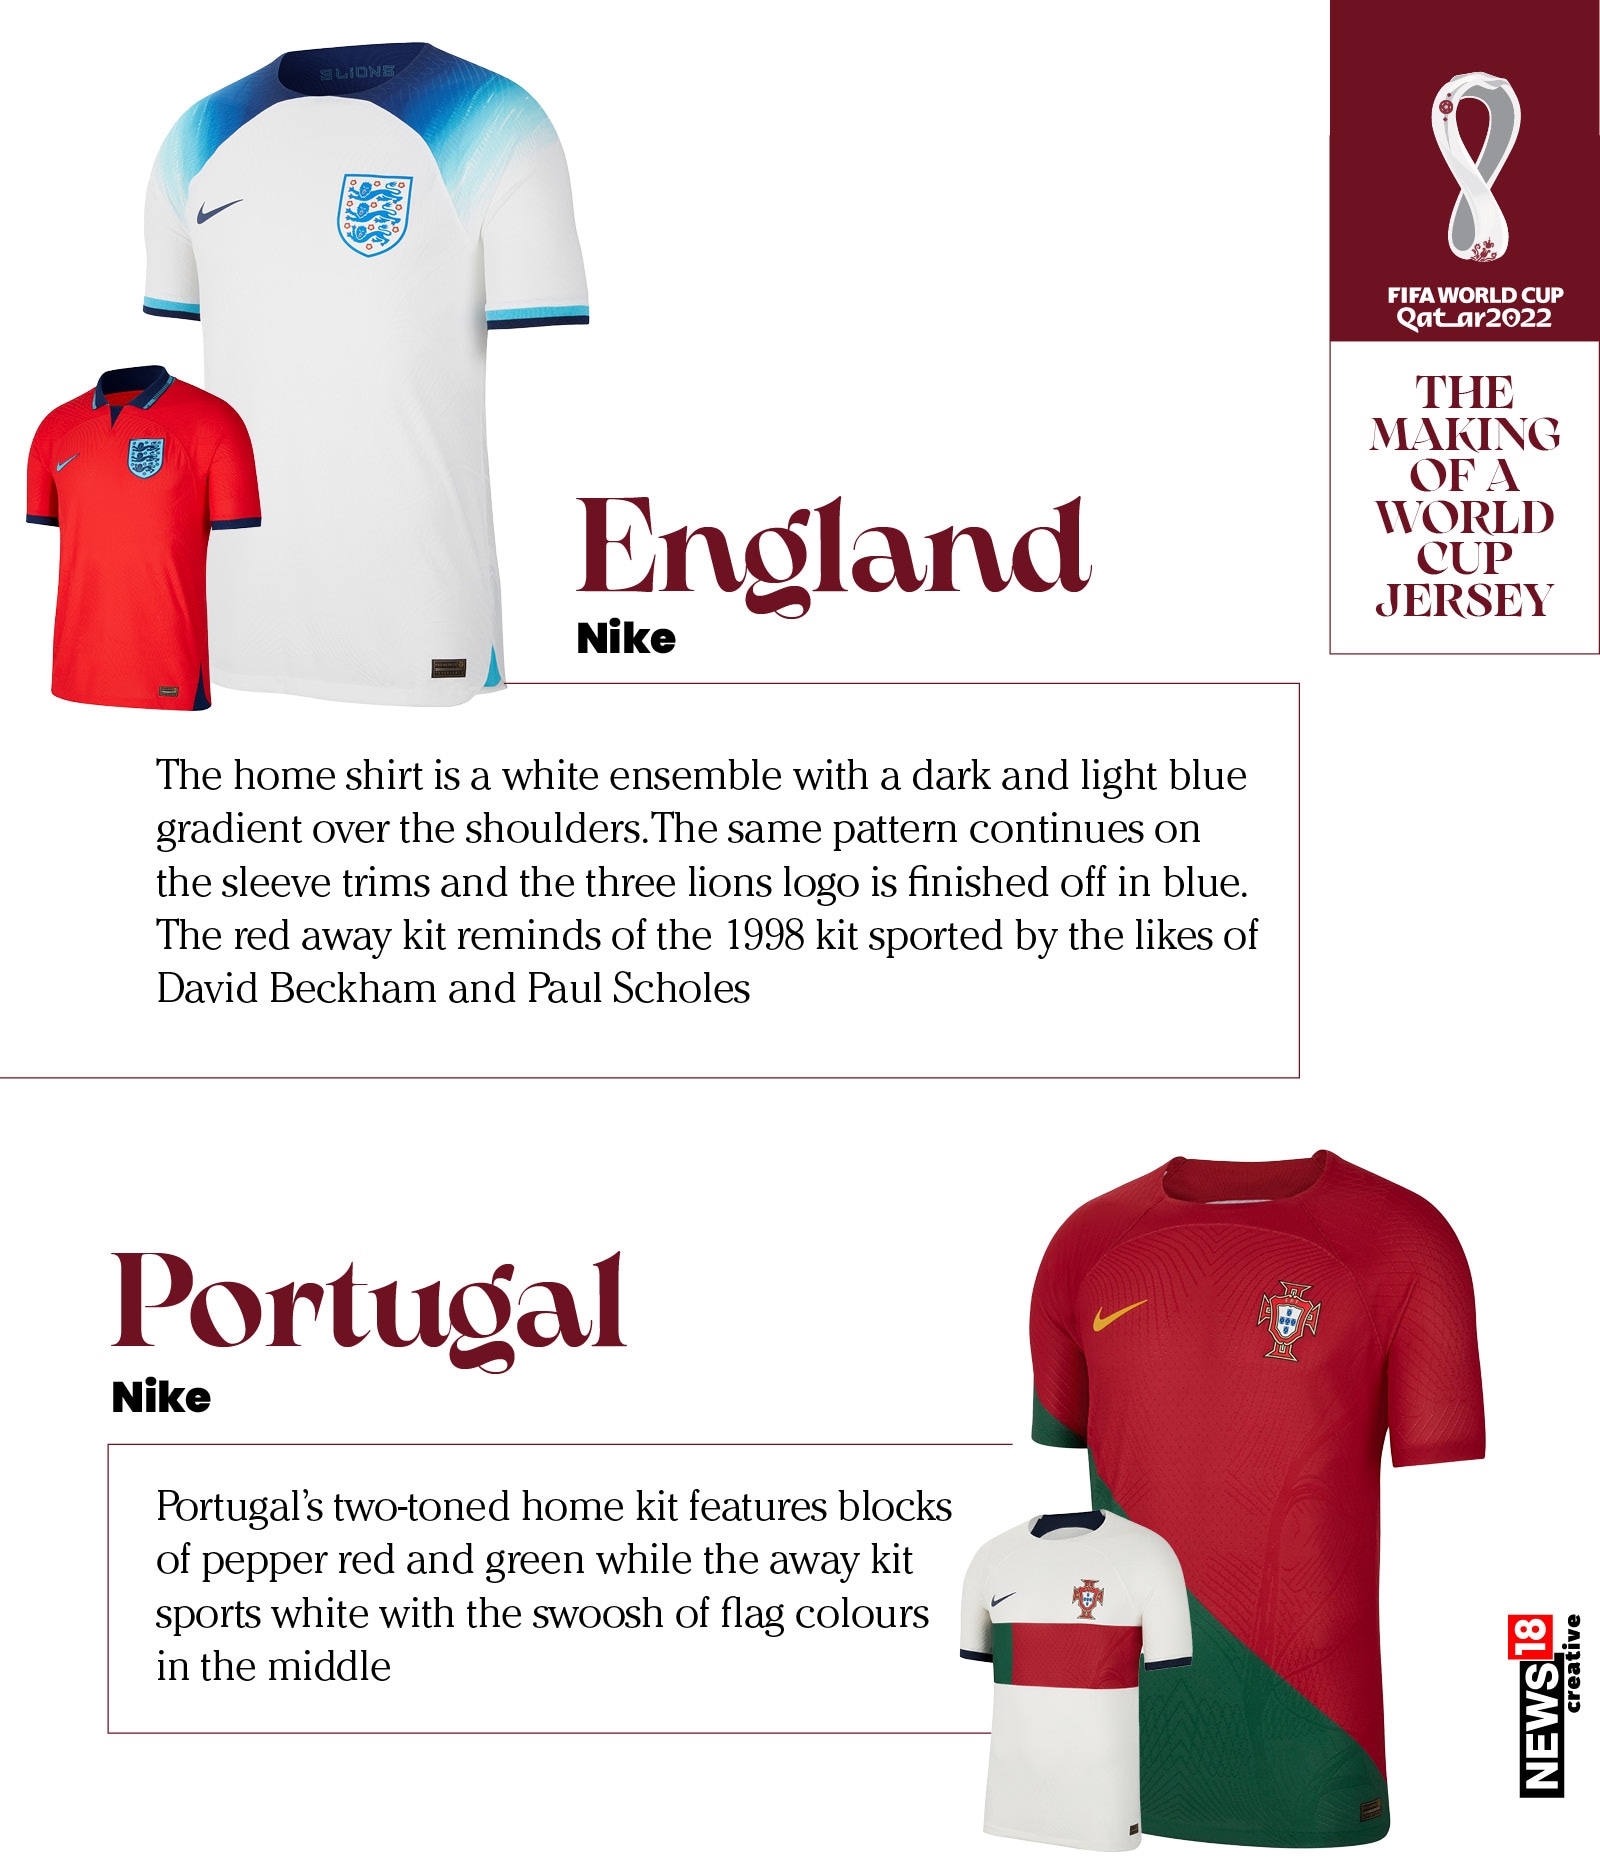 THE MAKING OF A WORLD CUP JERSEY: England and Portugal